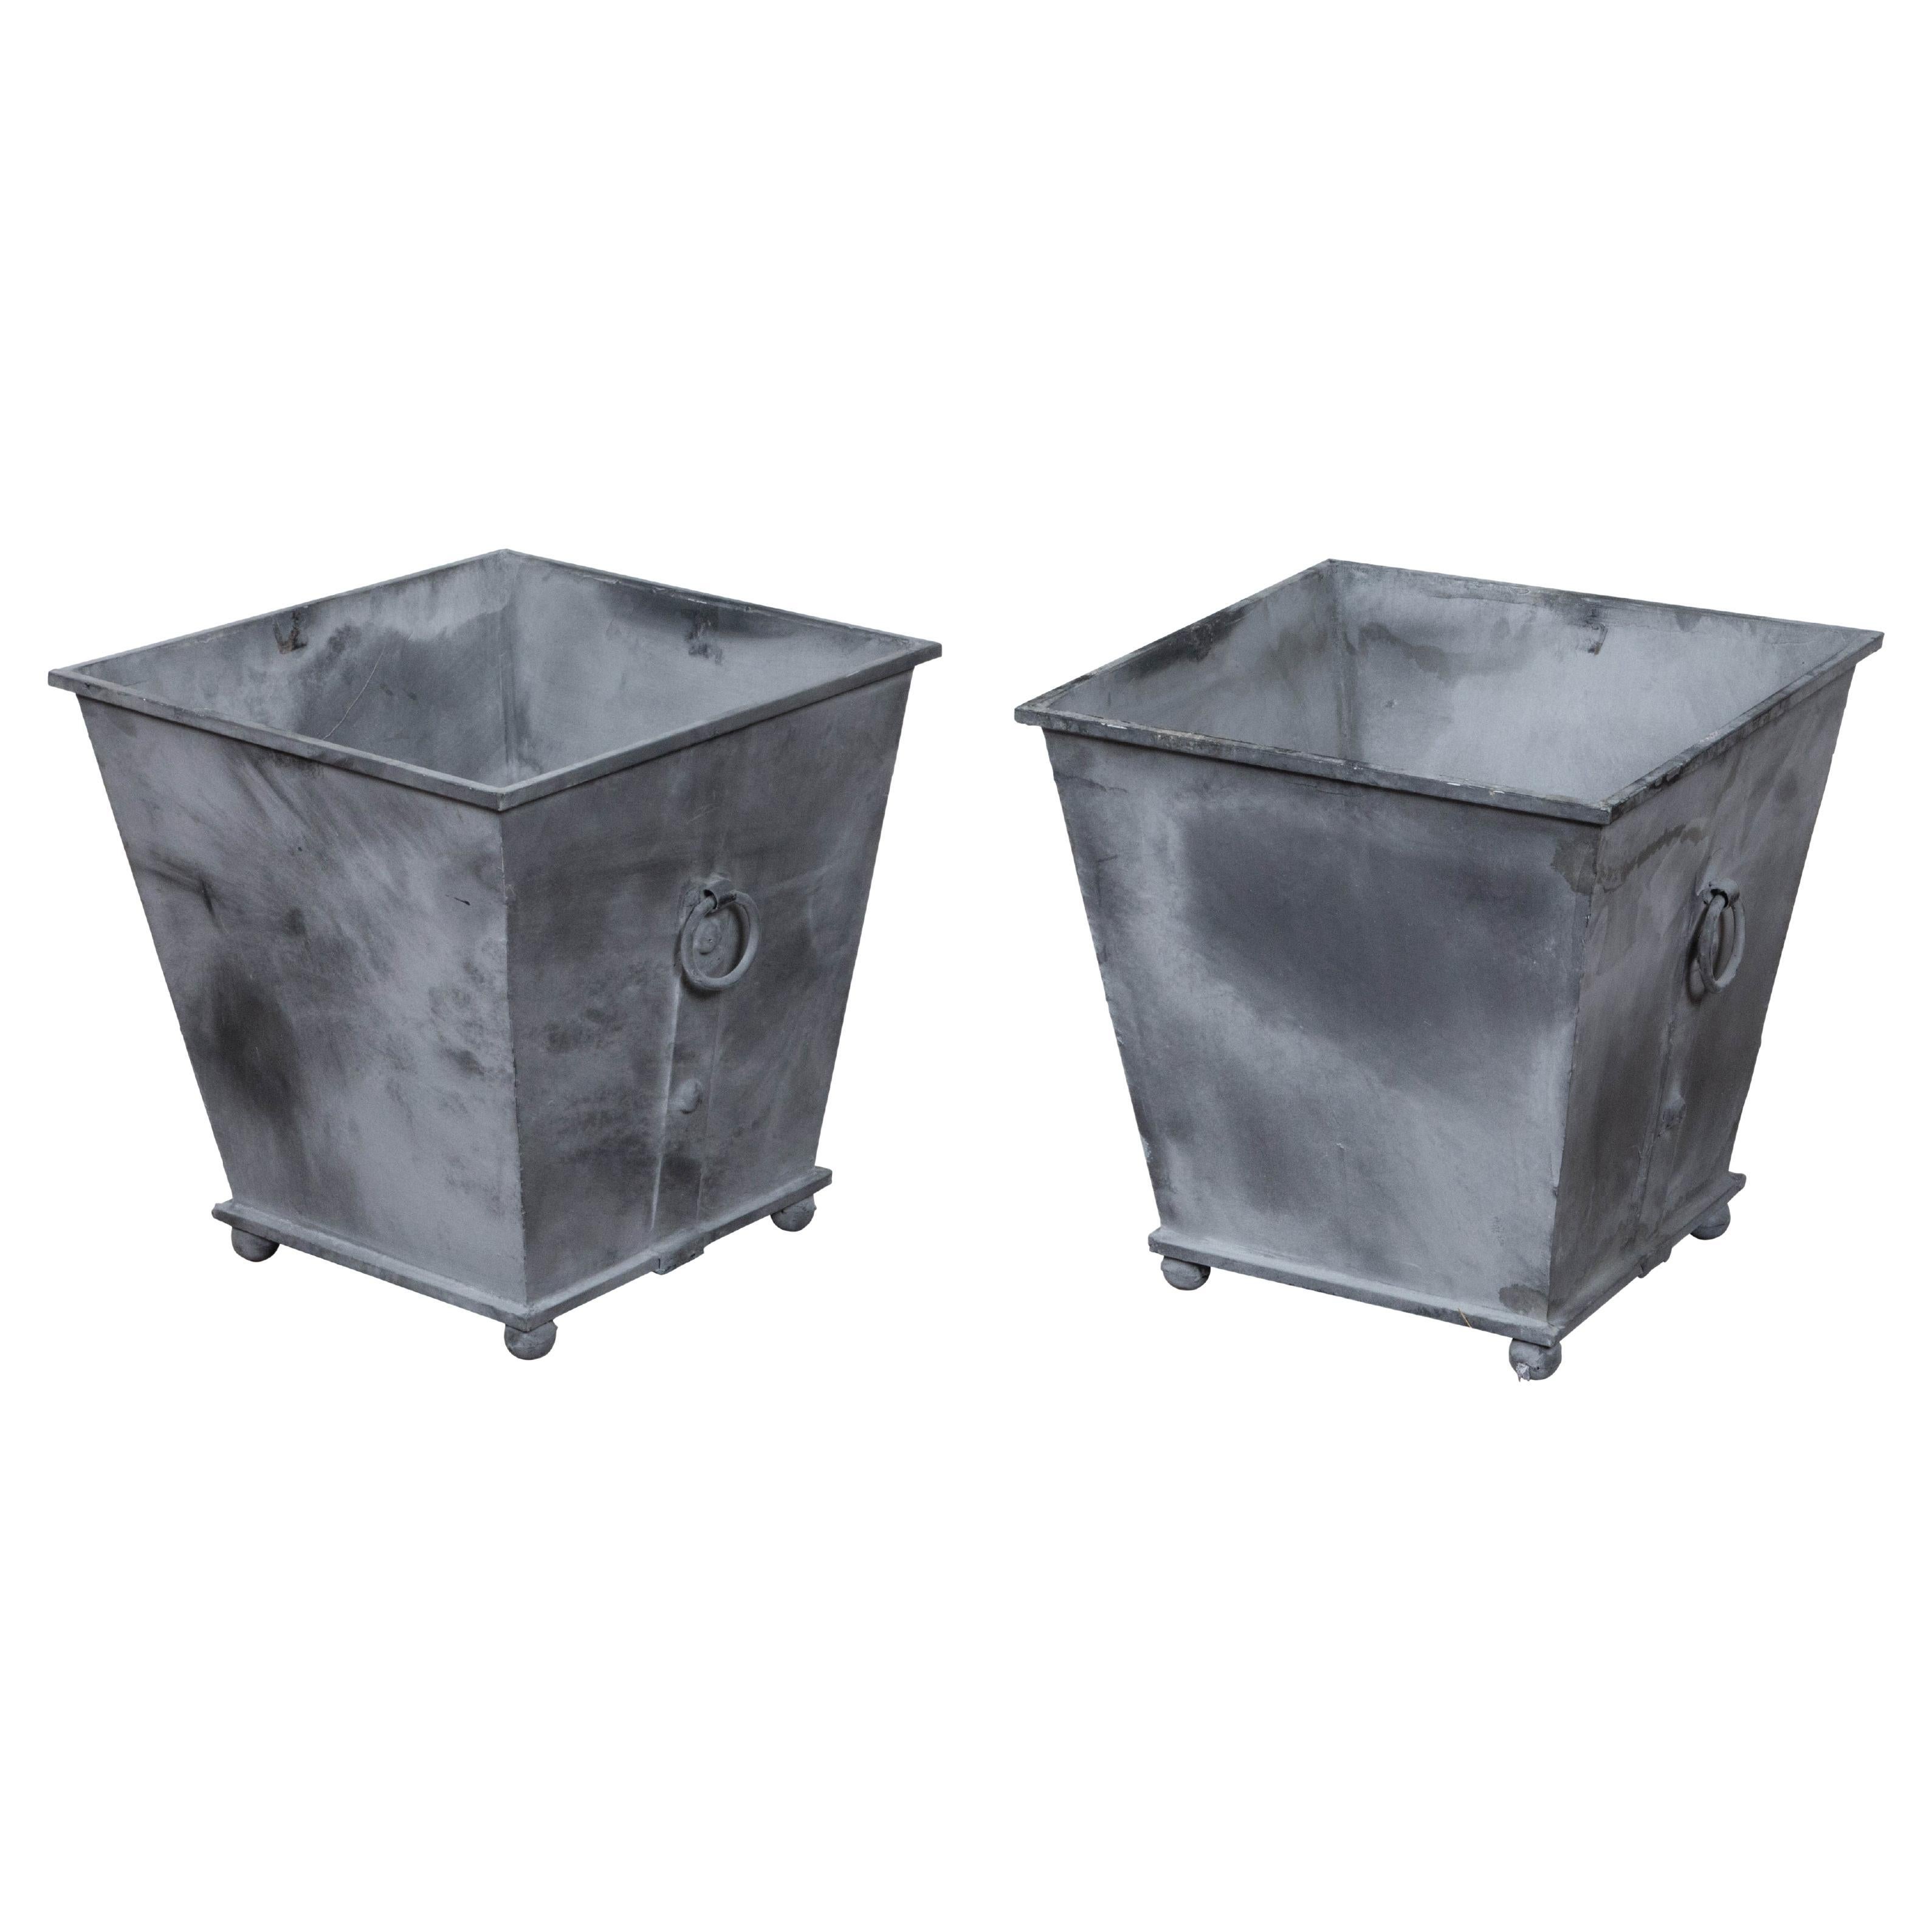 Pair of Vintage Grey Metal Planters with Tapered Lines, Ring Pulls and Ball Feet For Sale